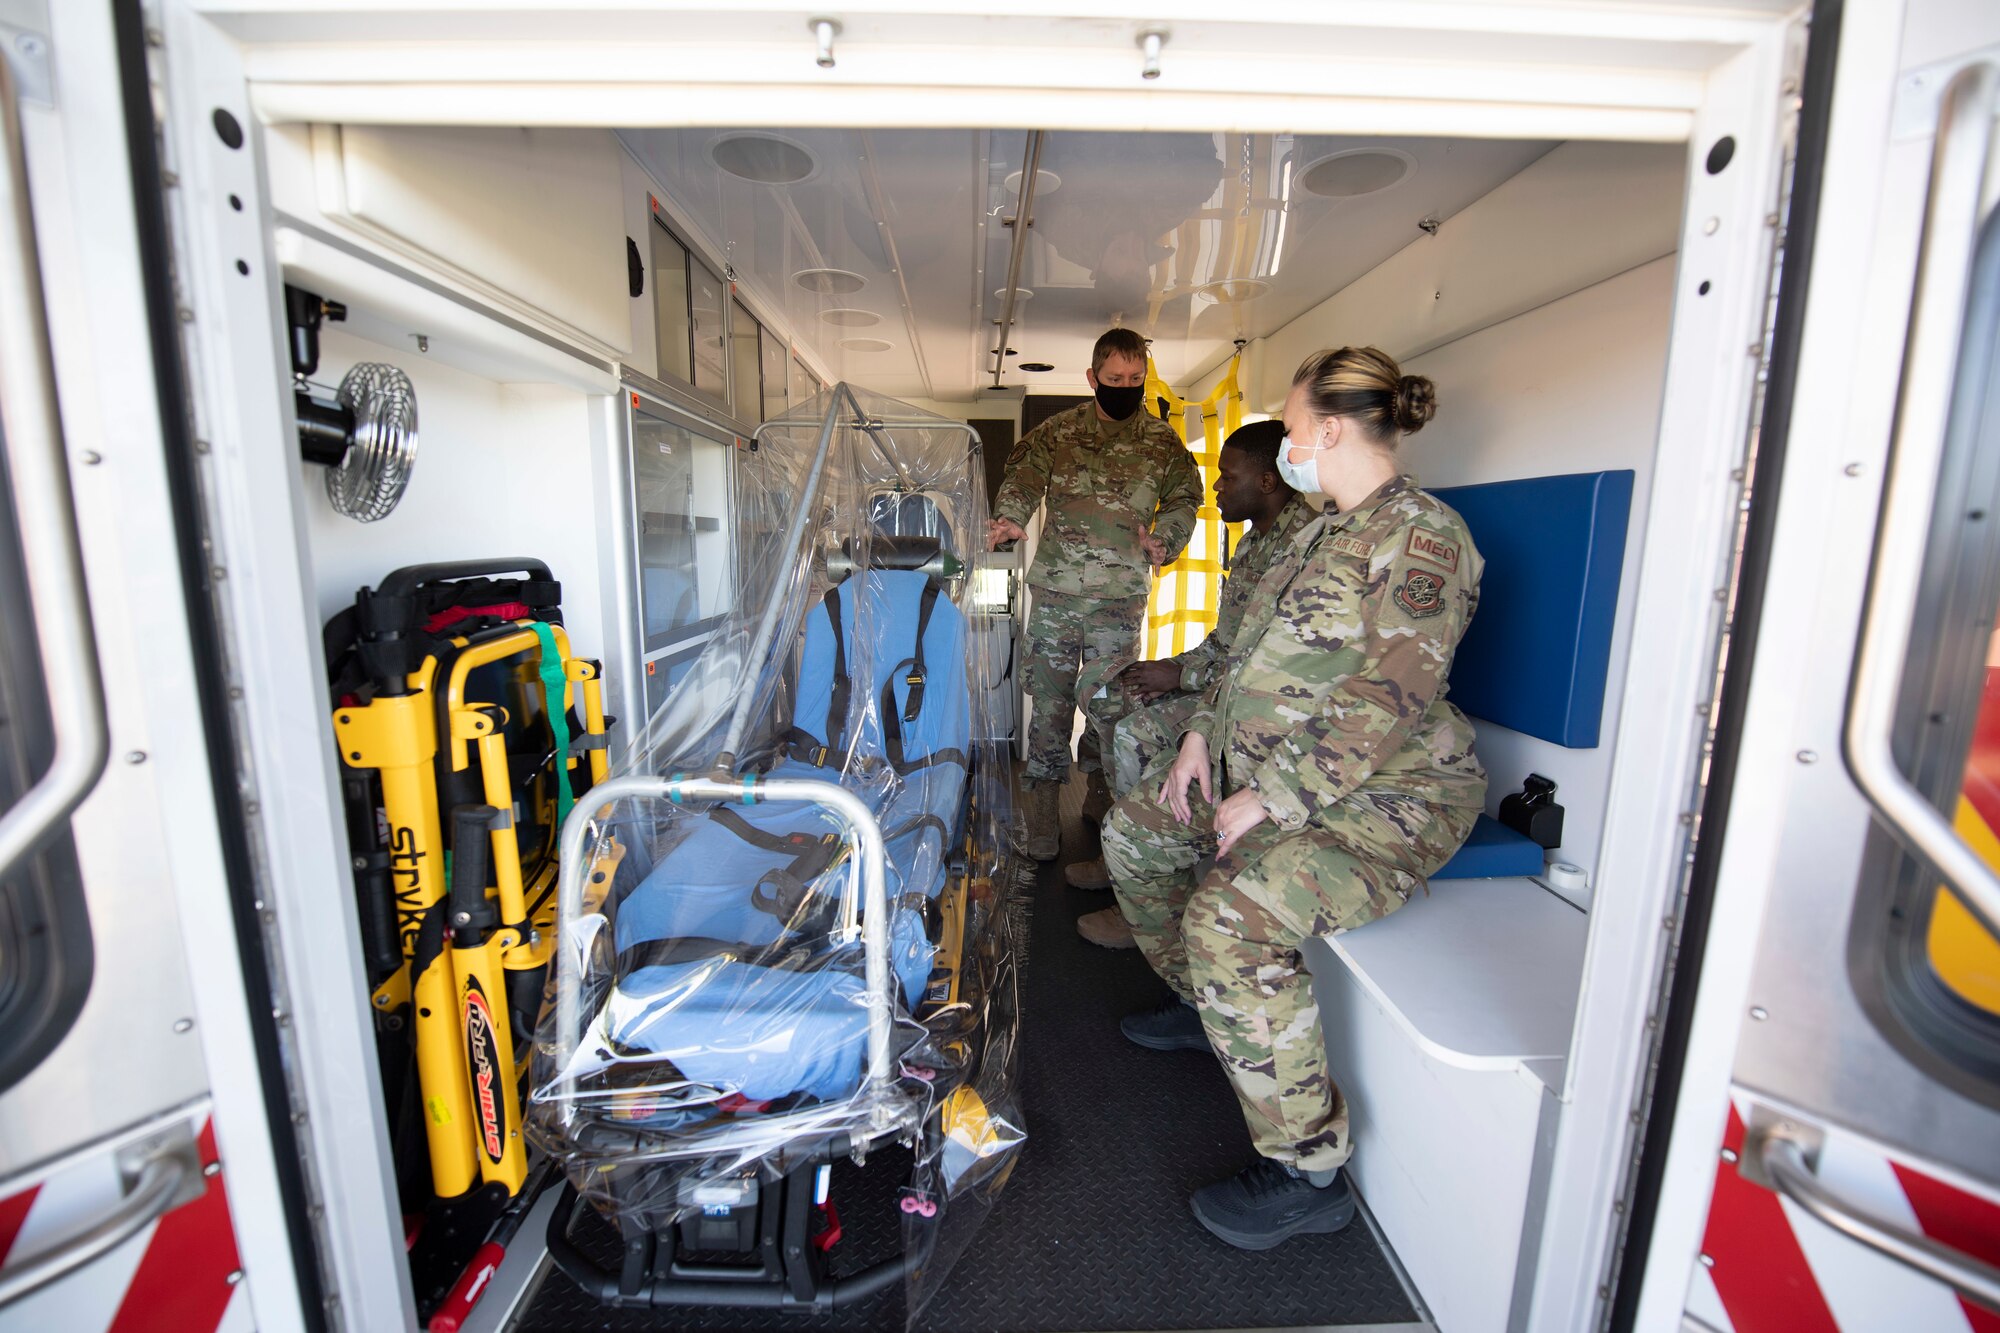 photos of Airmen describing innovative efforts being made to better protect first responders